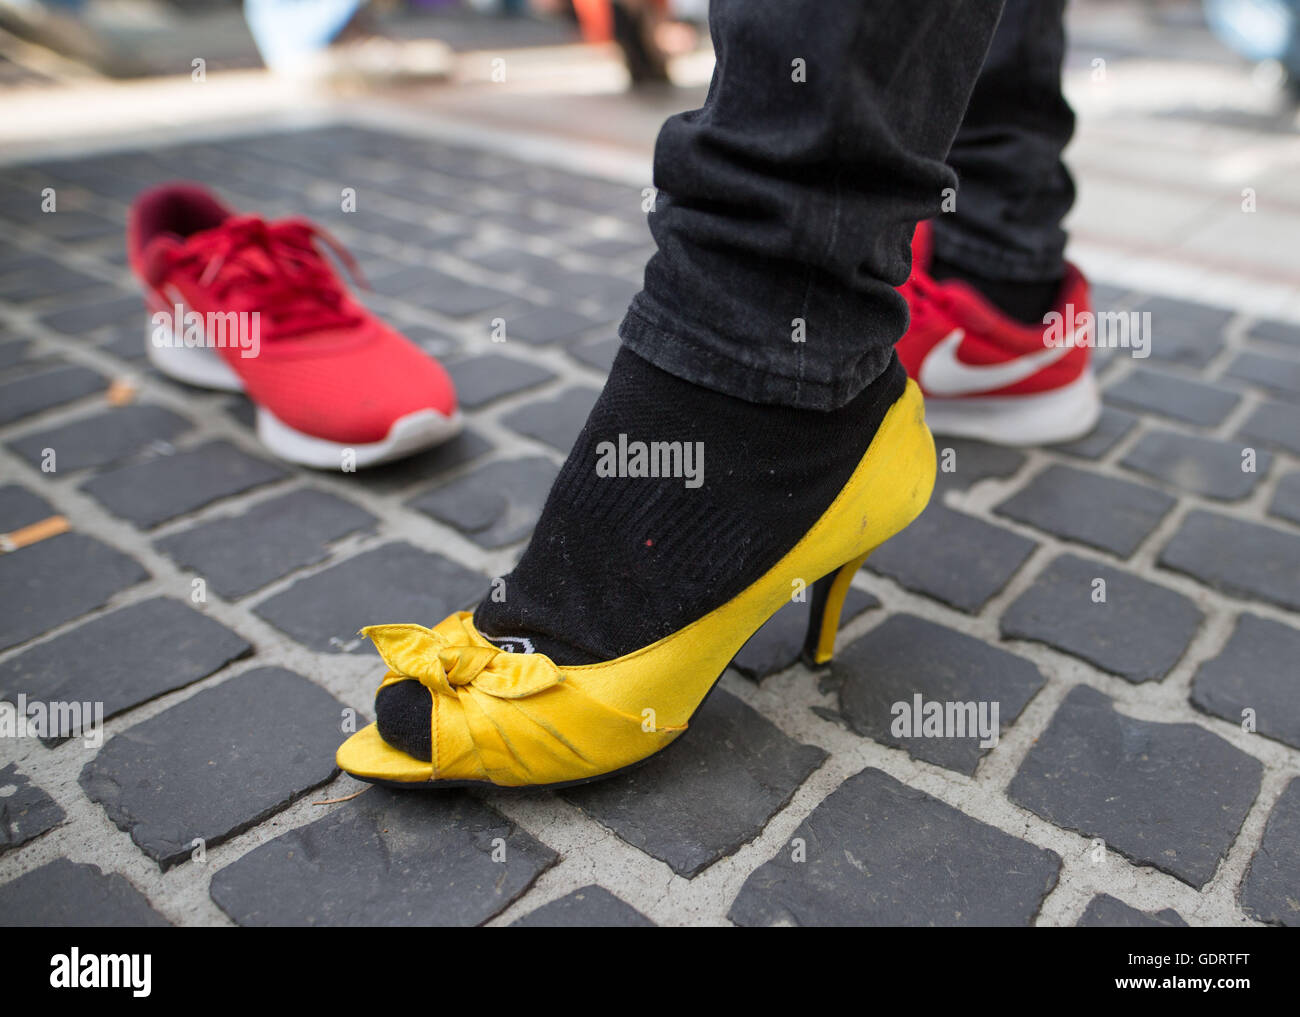 A participant wears yellow open toe pumps  during the High-Heel race in Frankfurt am Main, Germany, 16 July 2016. The race took place on occasion of the Christopher Street Day. Photo: Frank Rumpenhorst/dpa Stock Photo